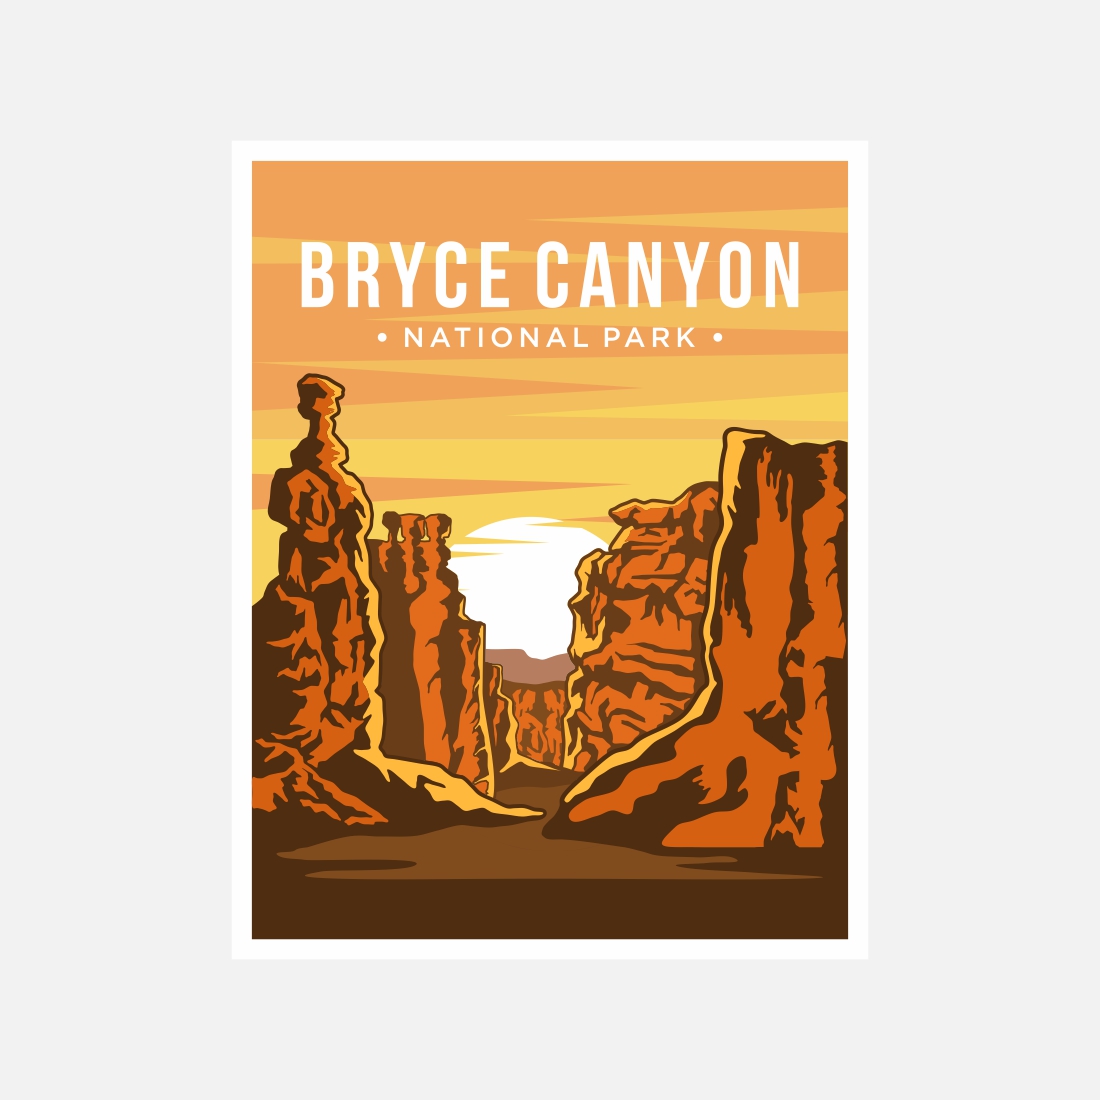 Bryce Canyon National Park Poster Vector Illustration - only $10 cover image.